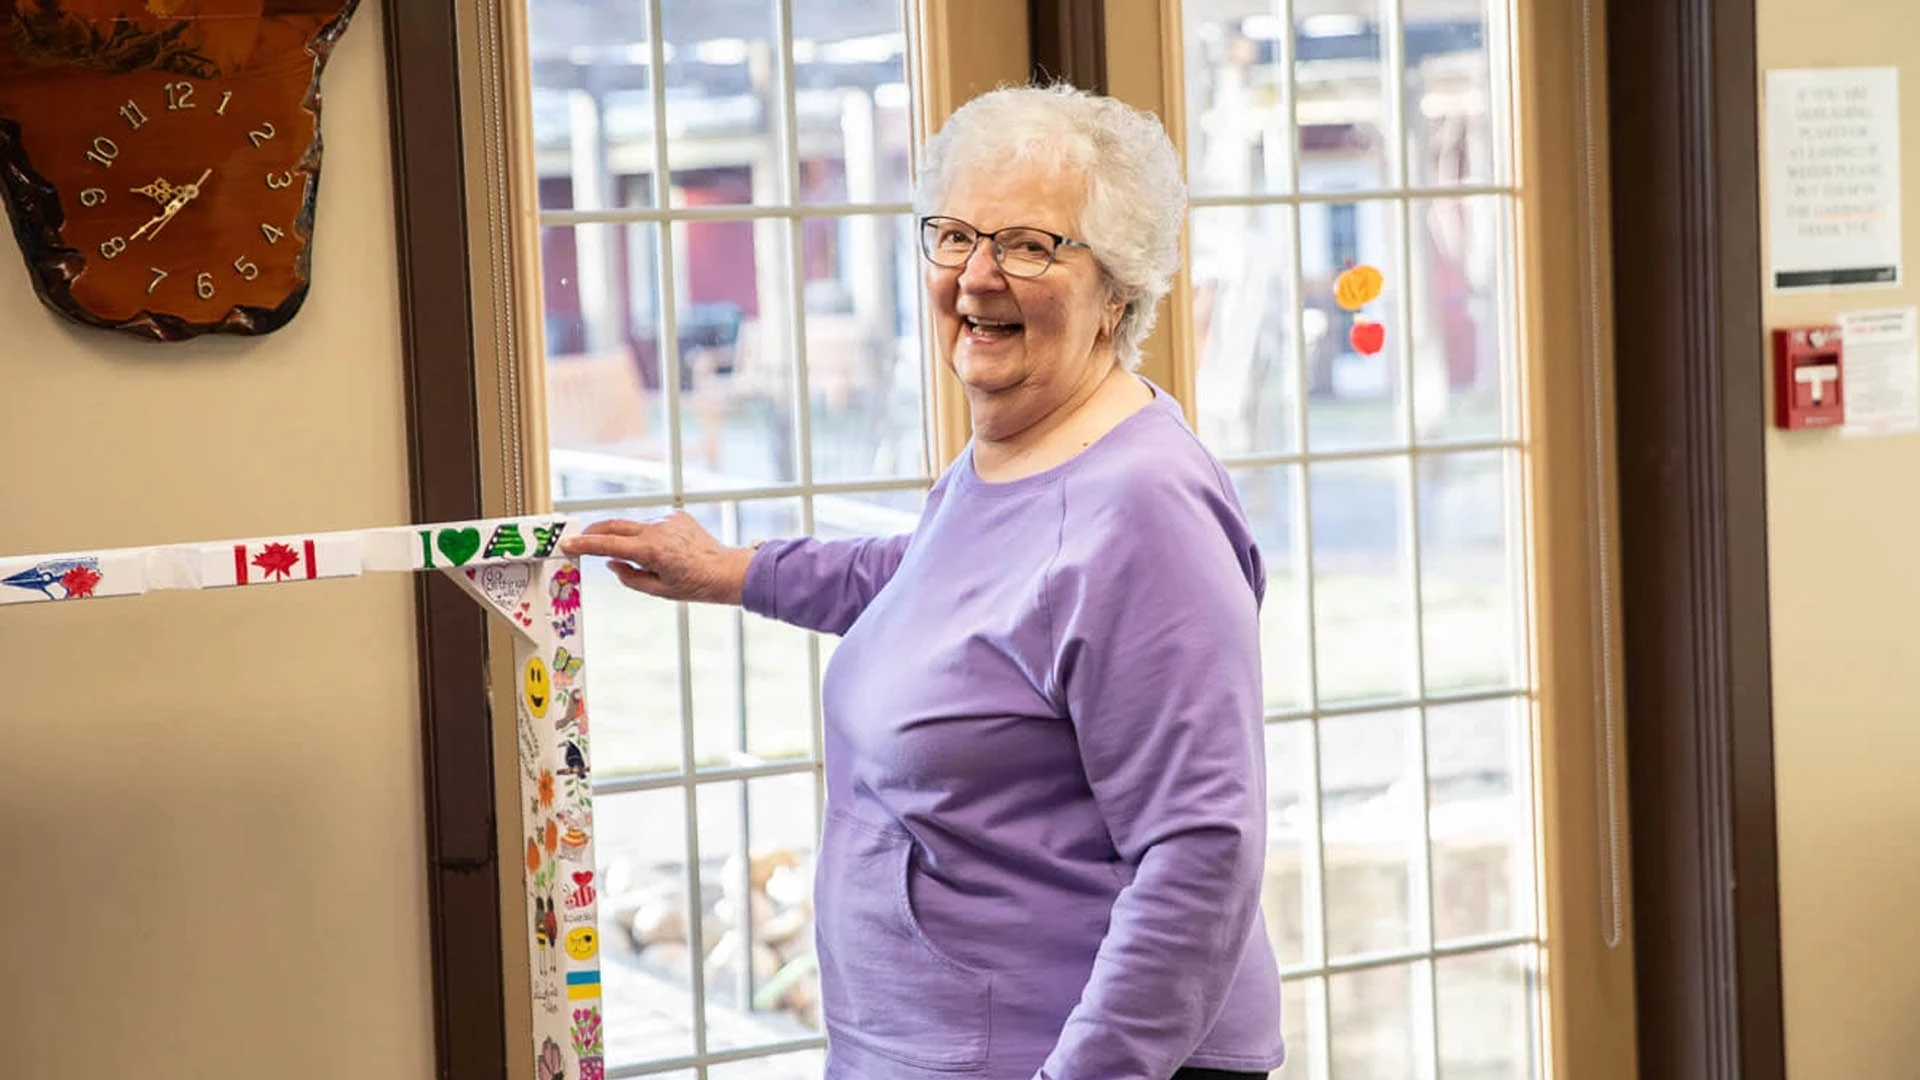 Elderly woman in a purple shirt pointing at a sticker and smiling